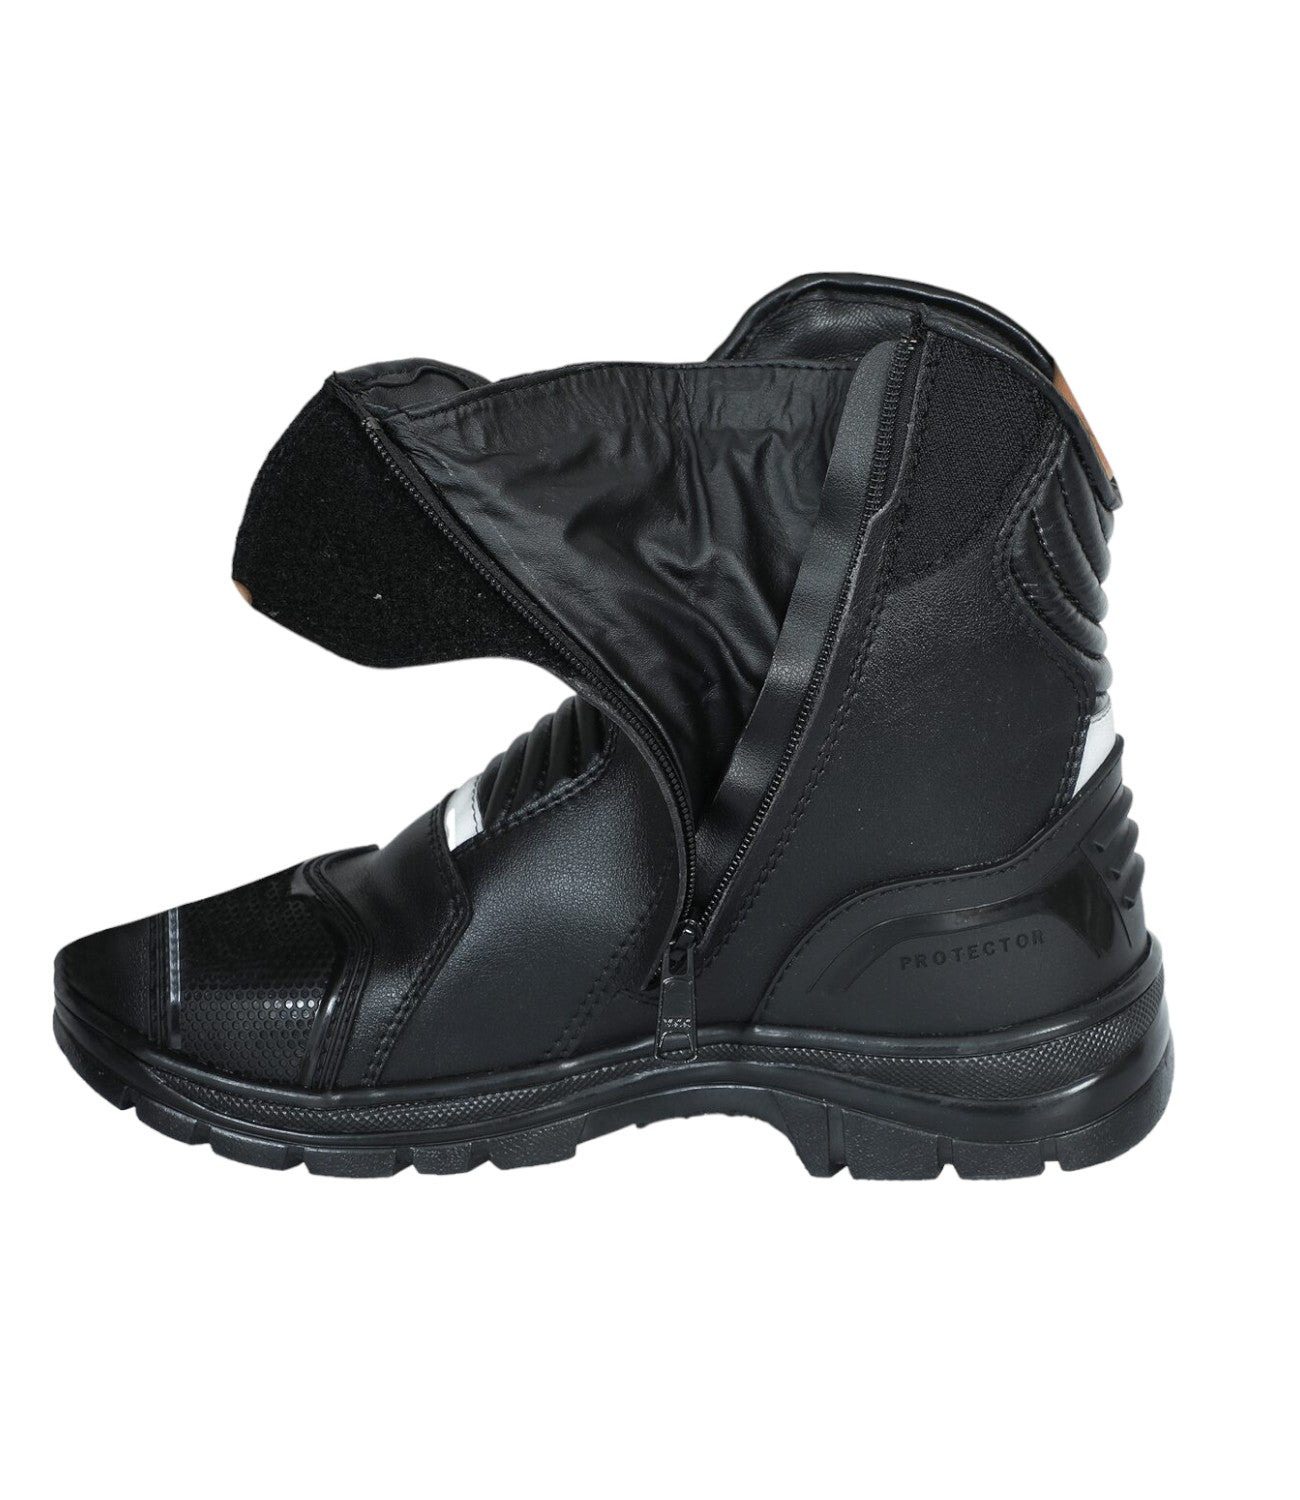 Solace Scout Motorcycle Boots - Black Neon